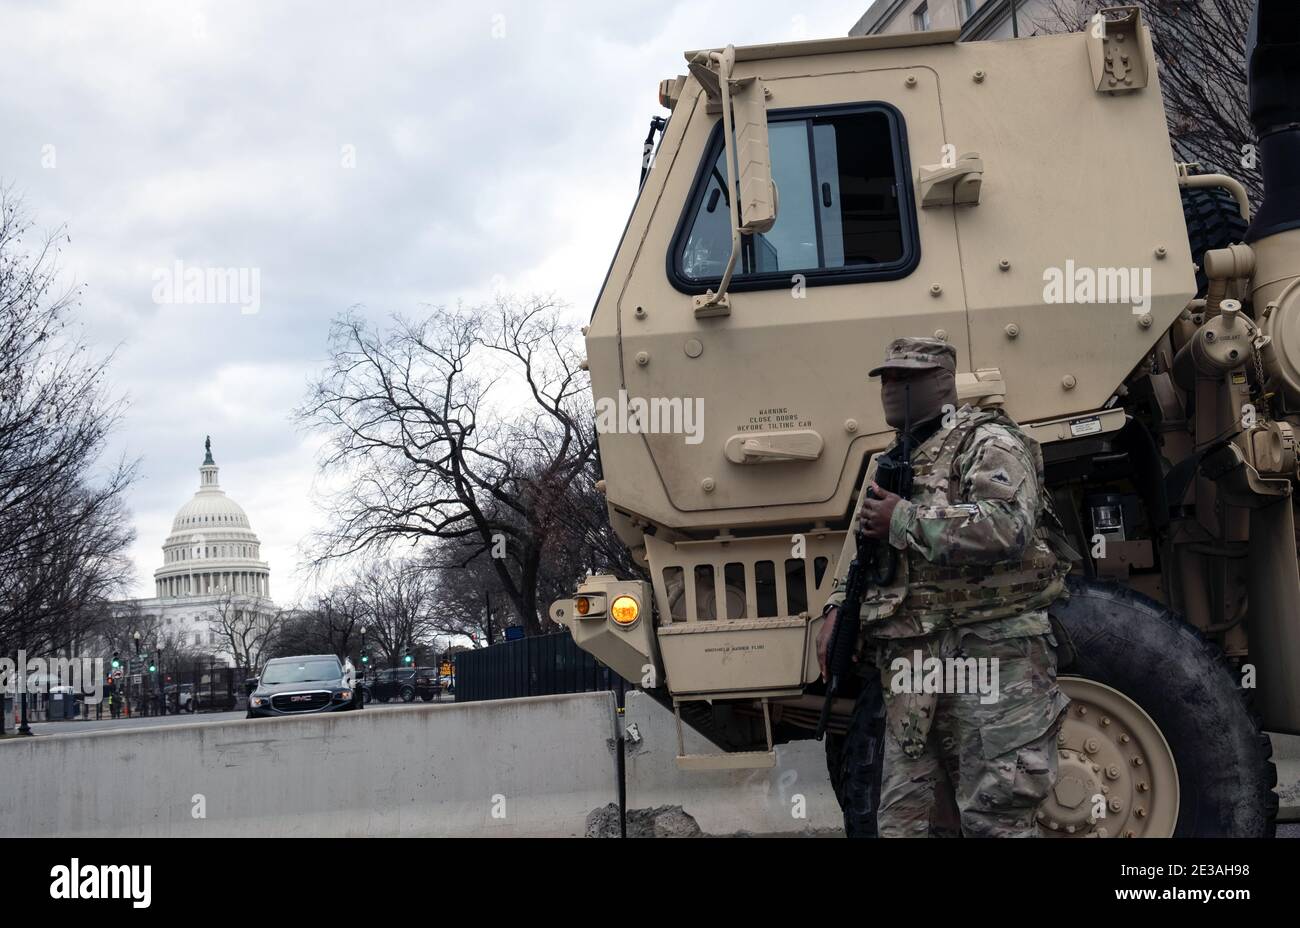 Washington, D.C. becomes a military zone days before the inauguration of Joe Biden as the 46th president of the United States. Stock Photo